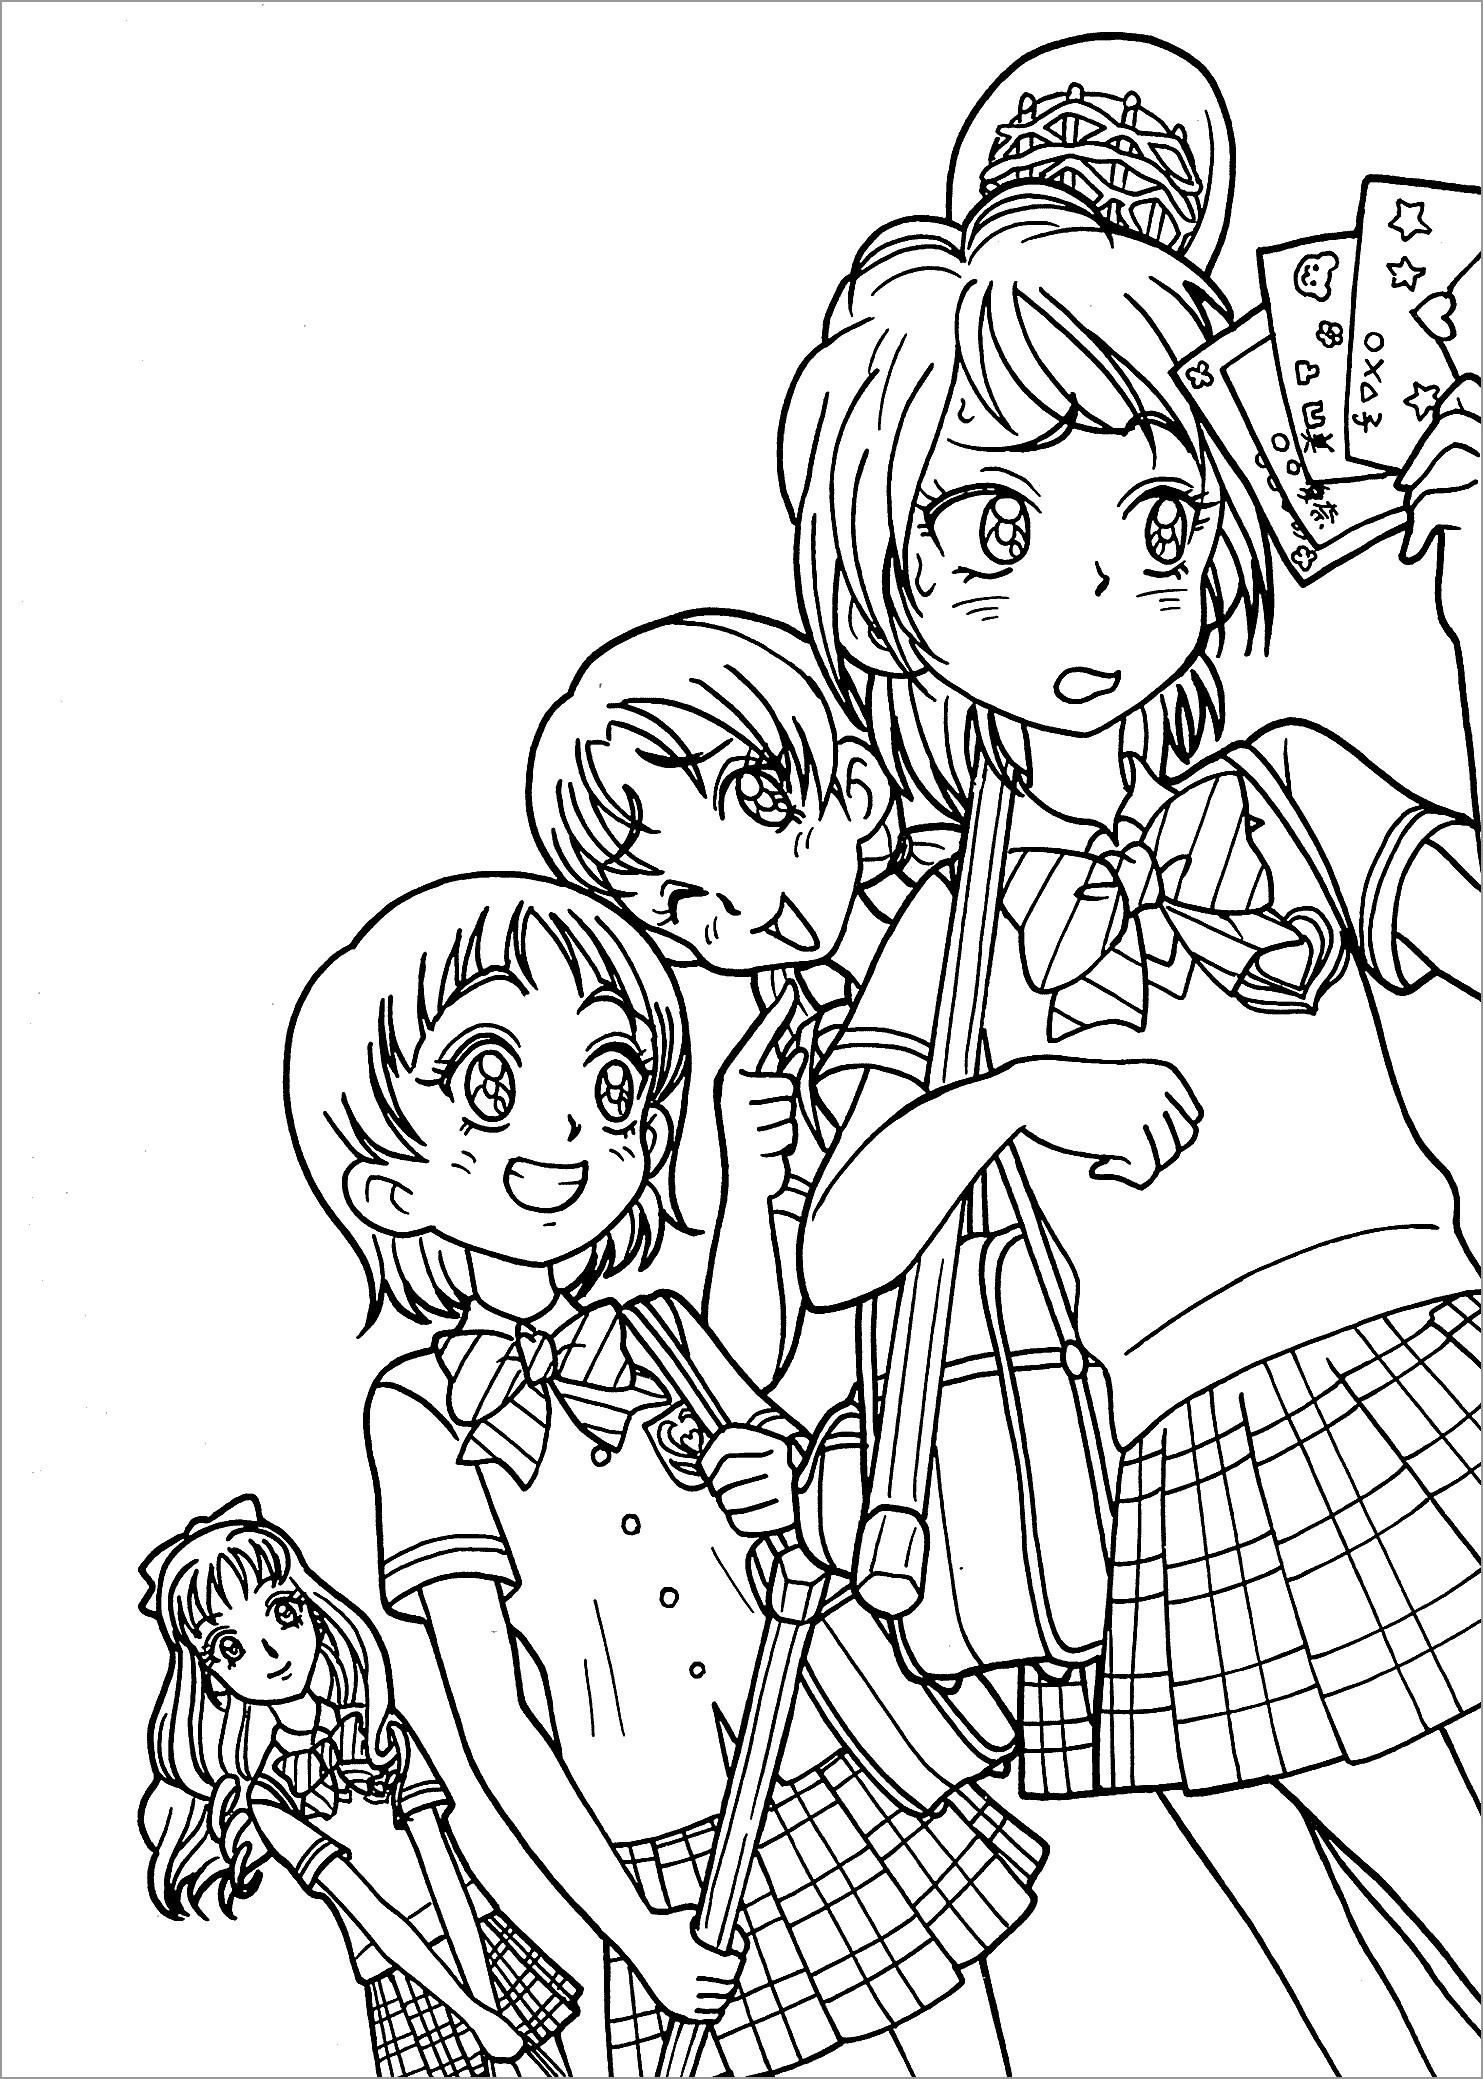 Girls Anime Coloring Page for Adults   ColoringBay